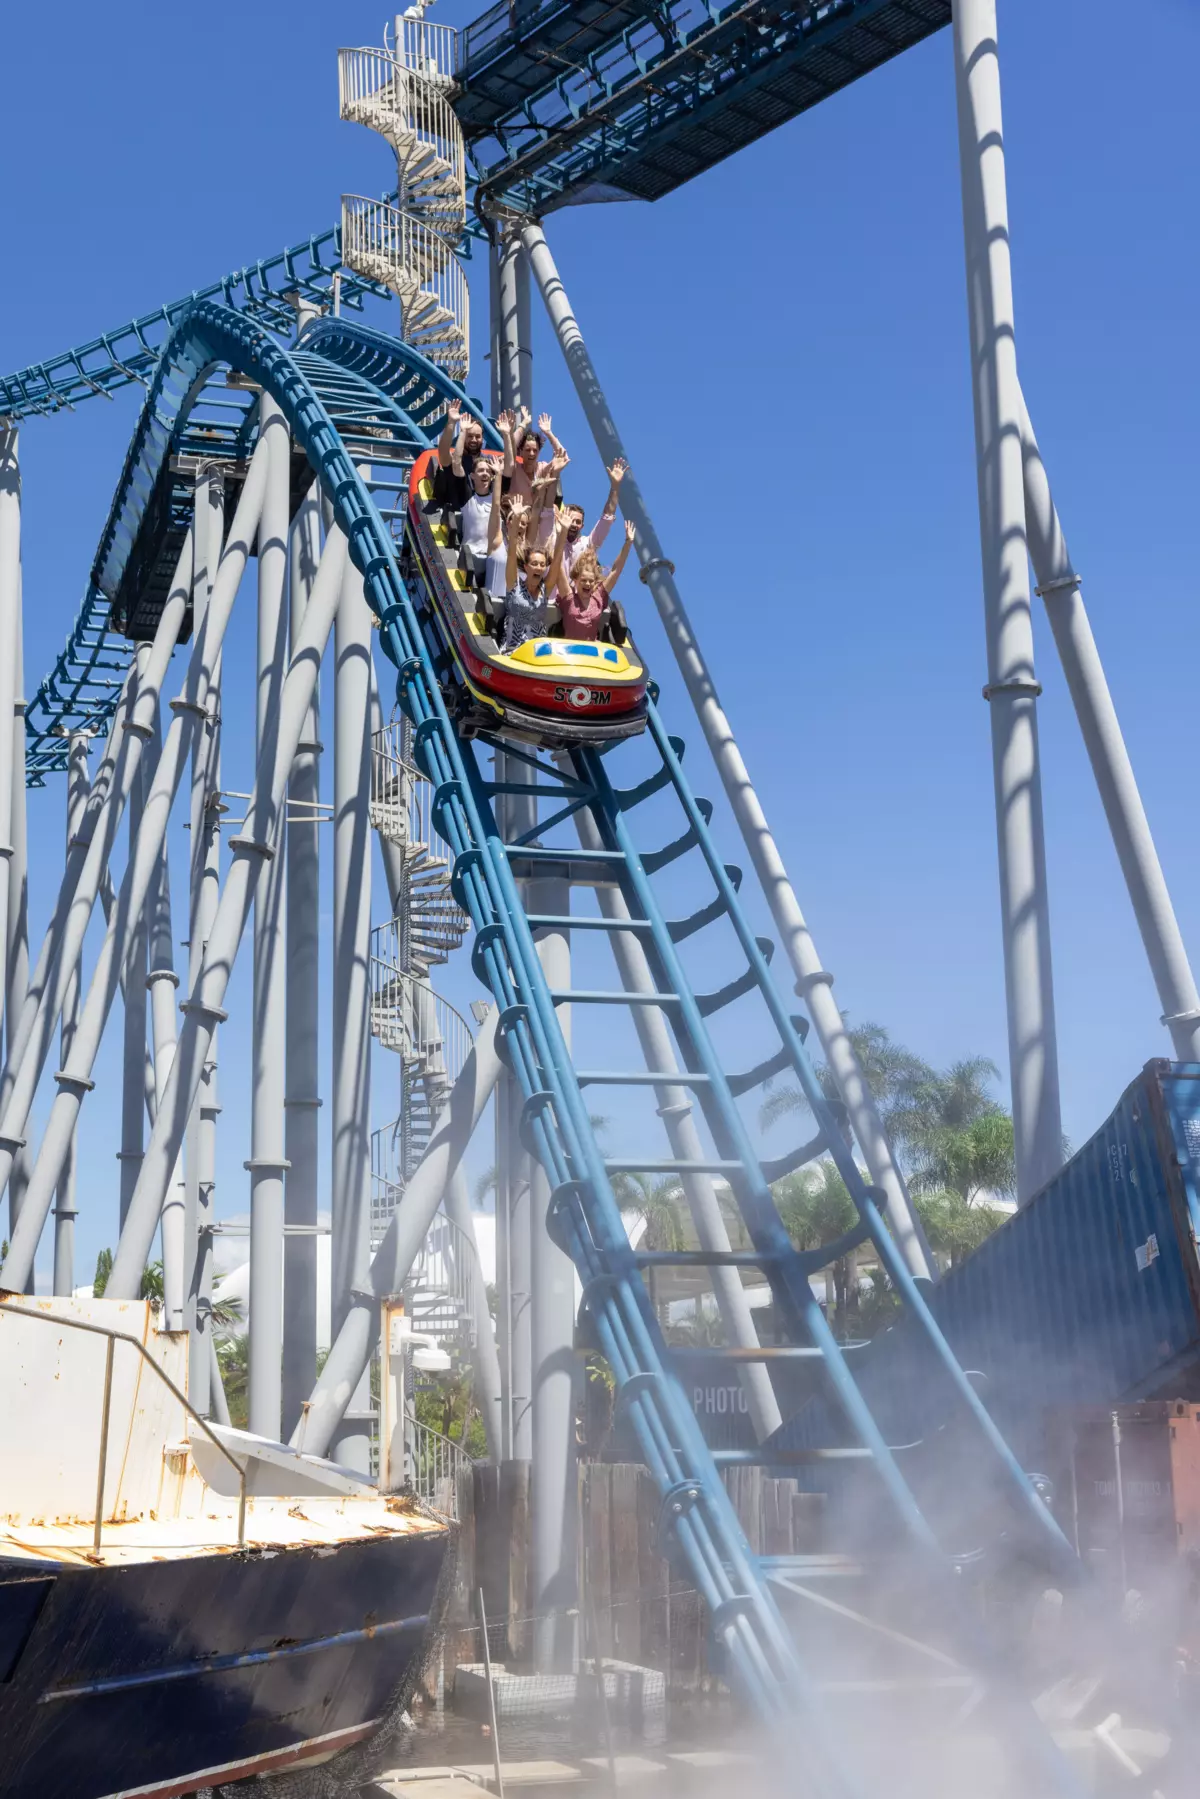 Best Gold Coast Theme Parks To Visit On Your Trip To Australia